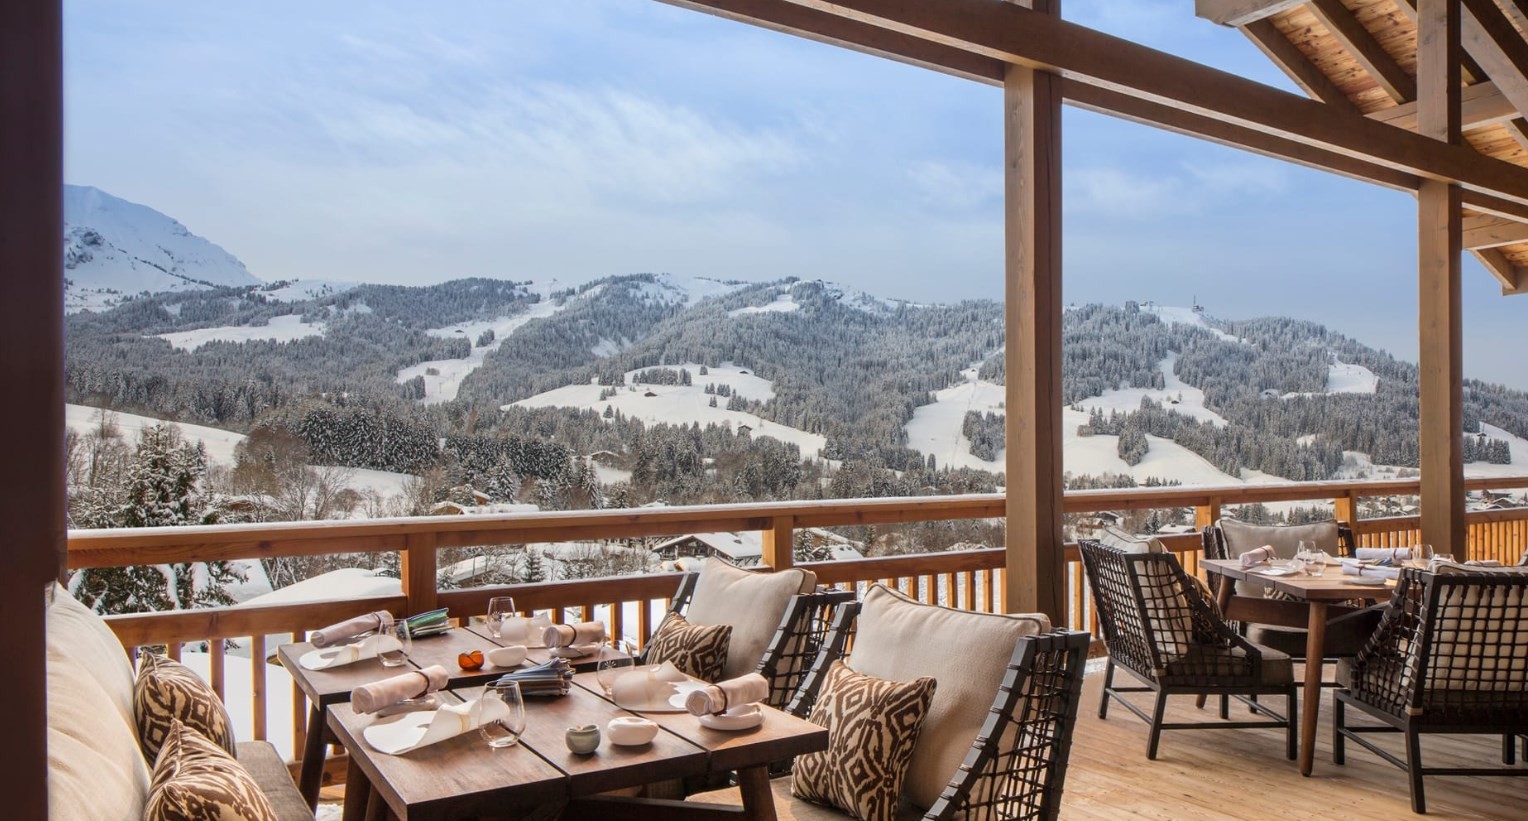 news-main-two-chefs-and-5-stars-for-a-high-flying-donner-at-the-restaurant-le-1920-at-four-seasons-hotel-megeve.1576746411.jpg